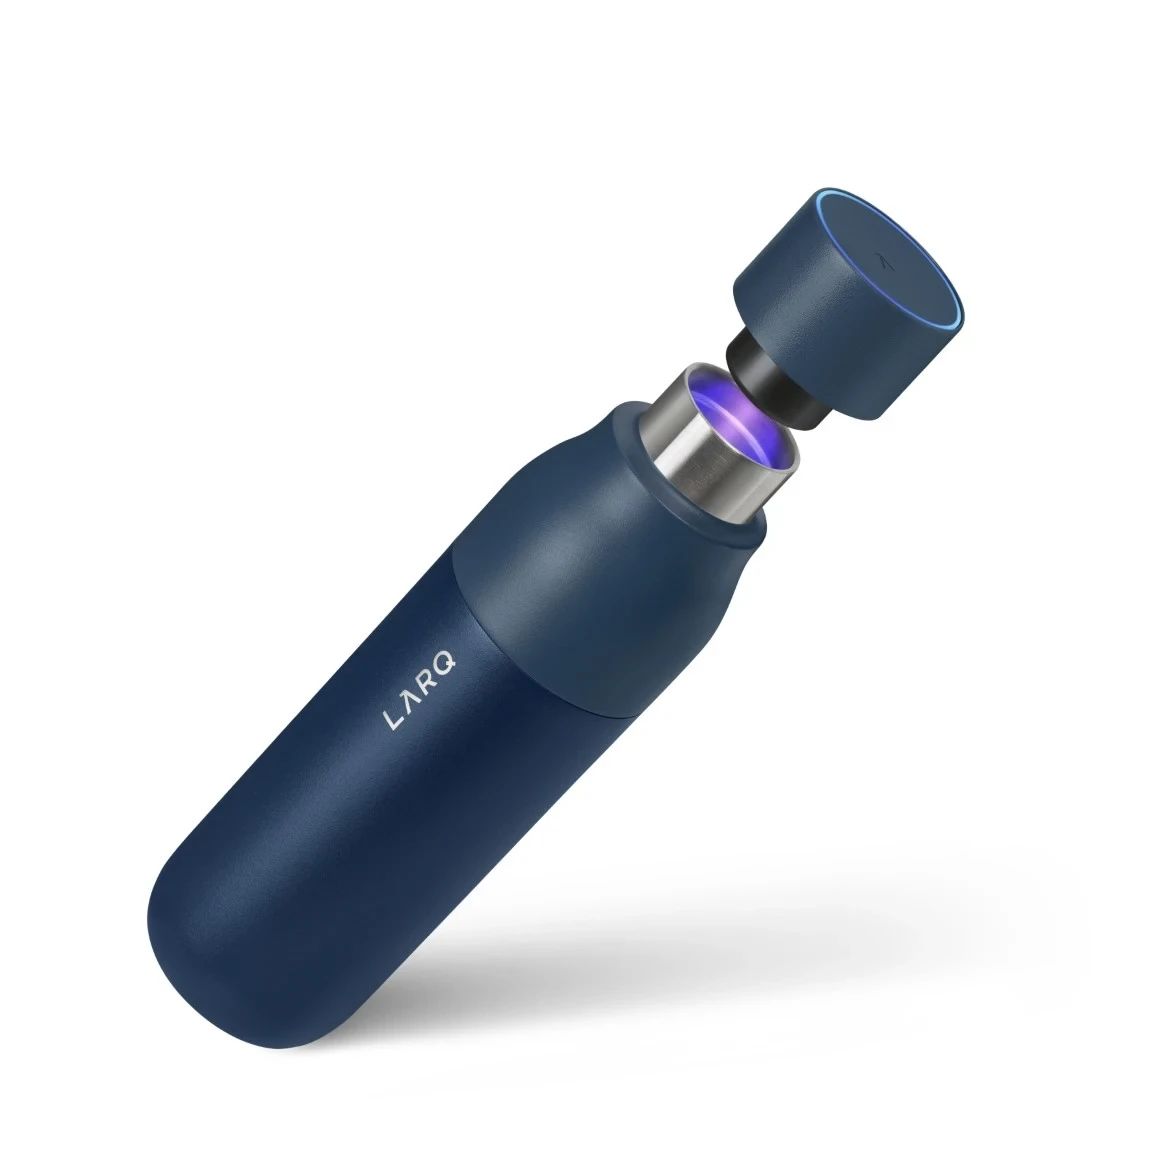 LARQ Bottle PureVis, cleans water with UV radiation